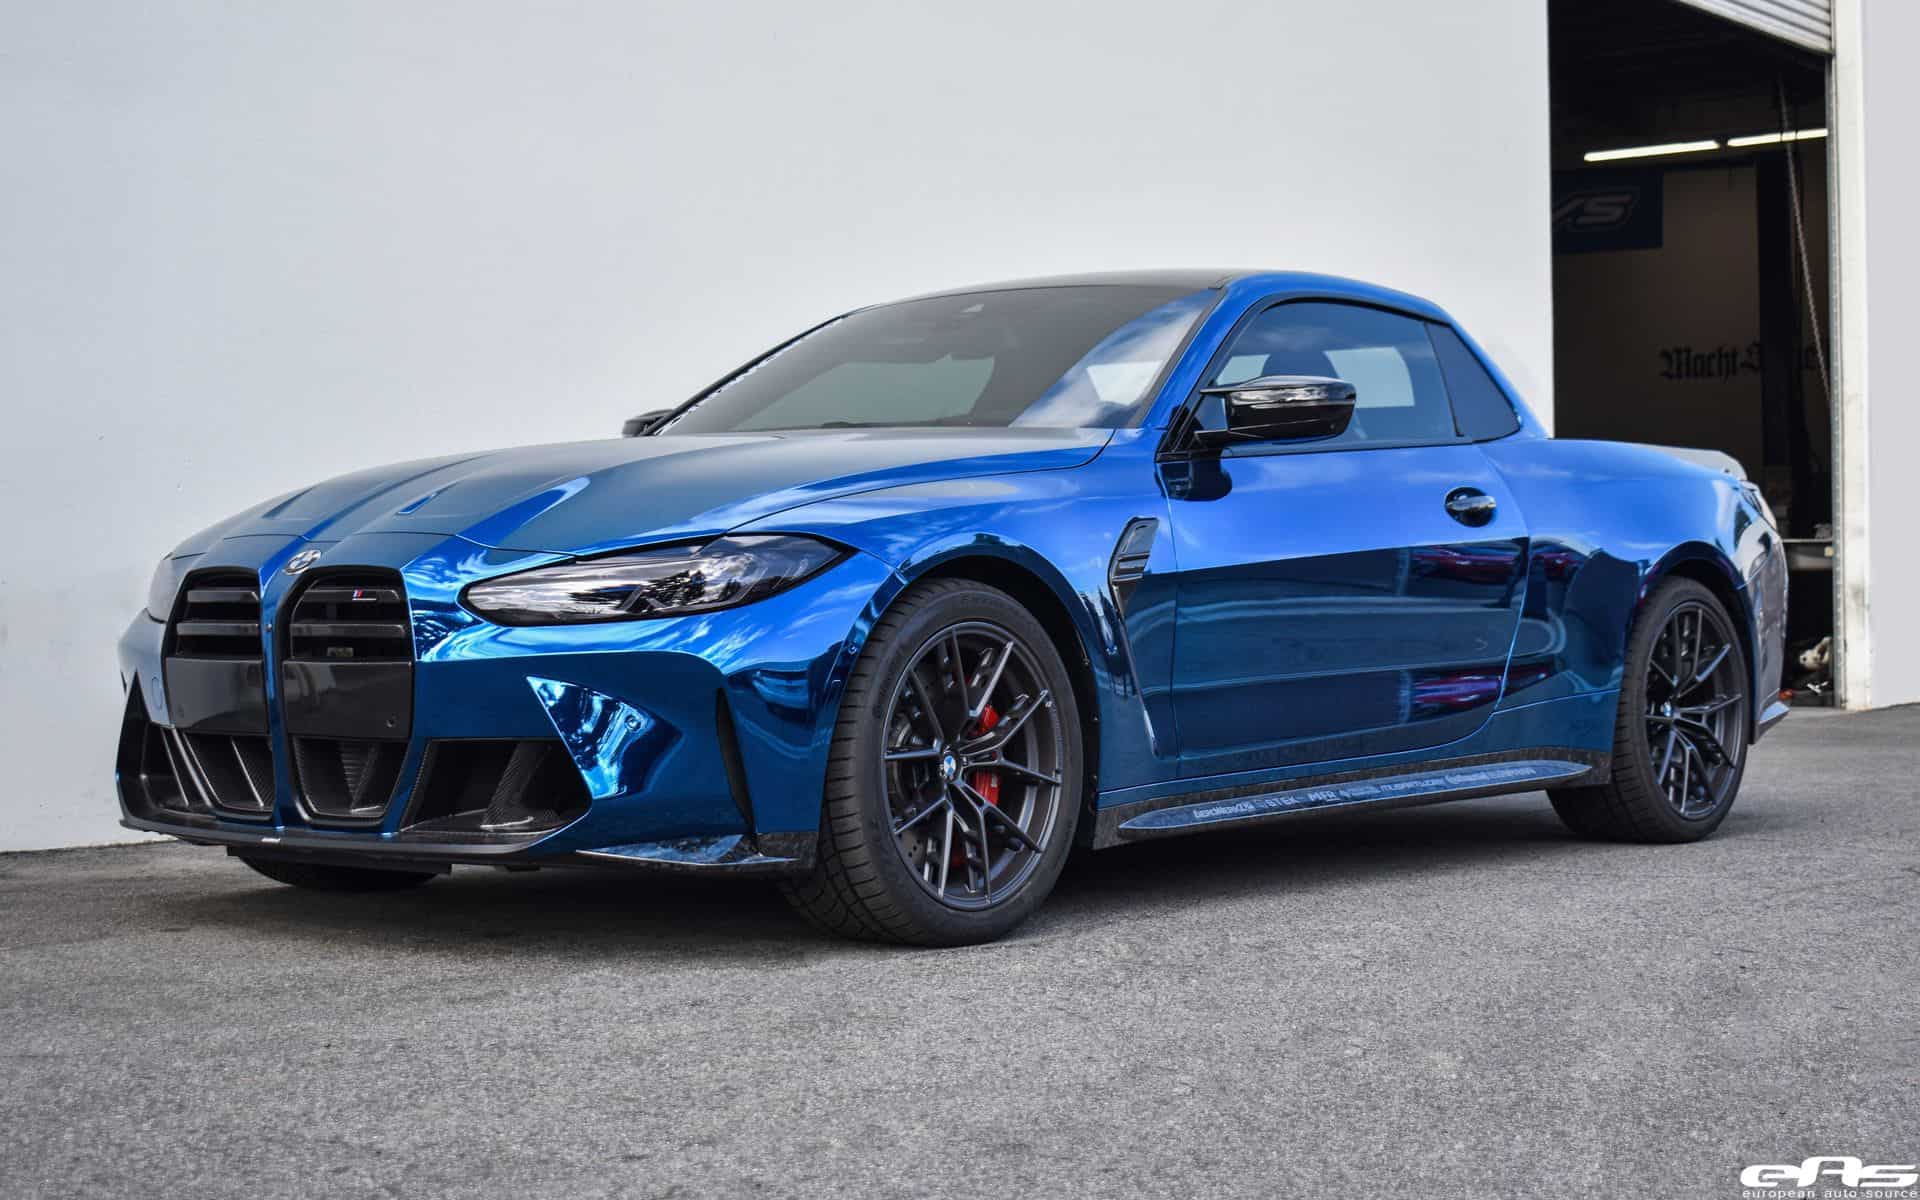 This Bmw M4 Ute Is A 500 Horsepower Two-Door Pickup Truck